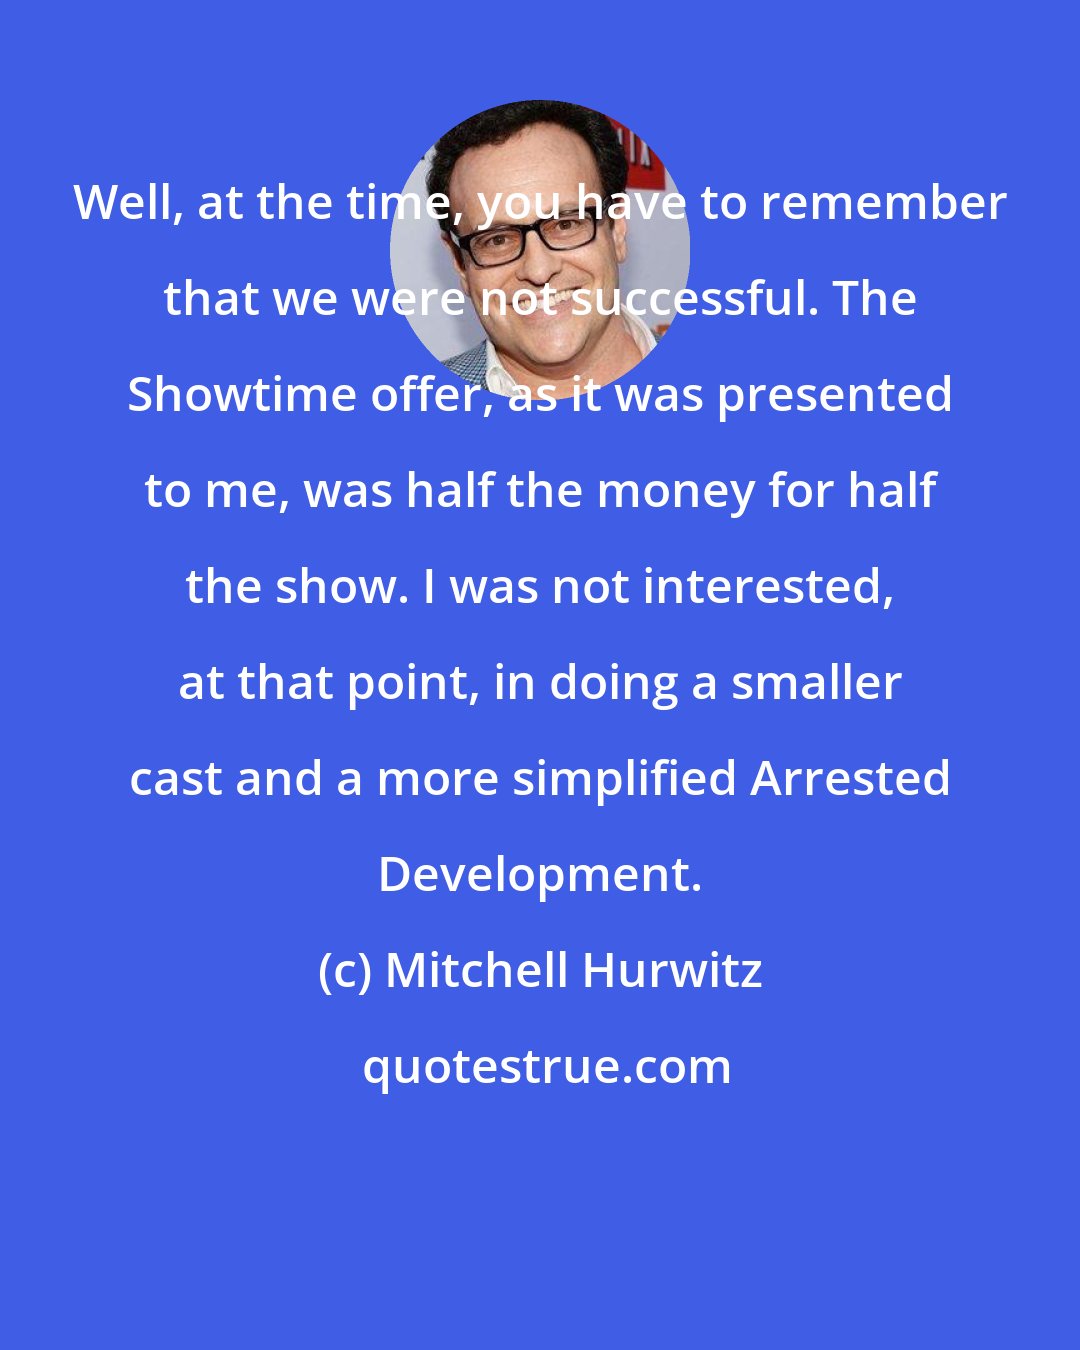 Mitchell Hurwitz: Well, at the time, you have to remember that we were not successful. The Showtime offer, as it was presented to me, was half the money for half the show. I was not interested, at that point, in doing a smaller cast and a more simplified Arrested Development.